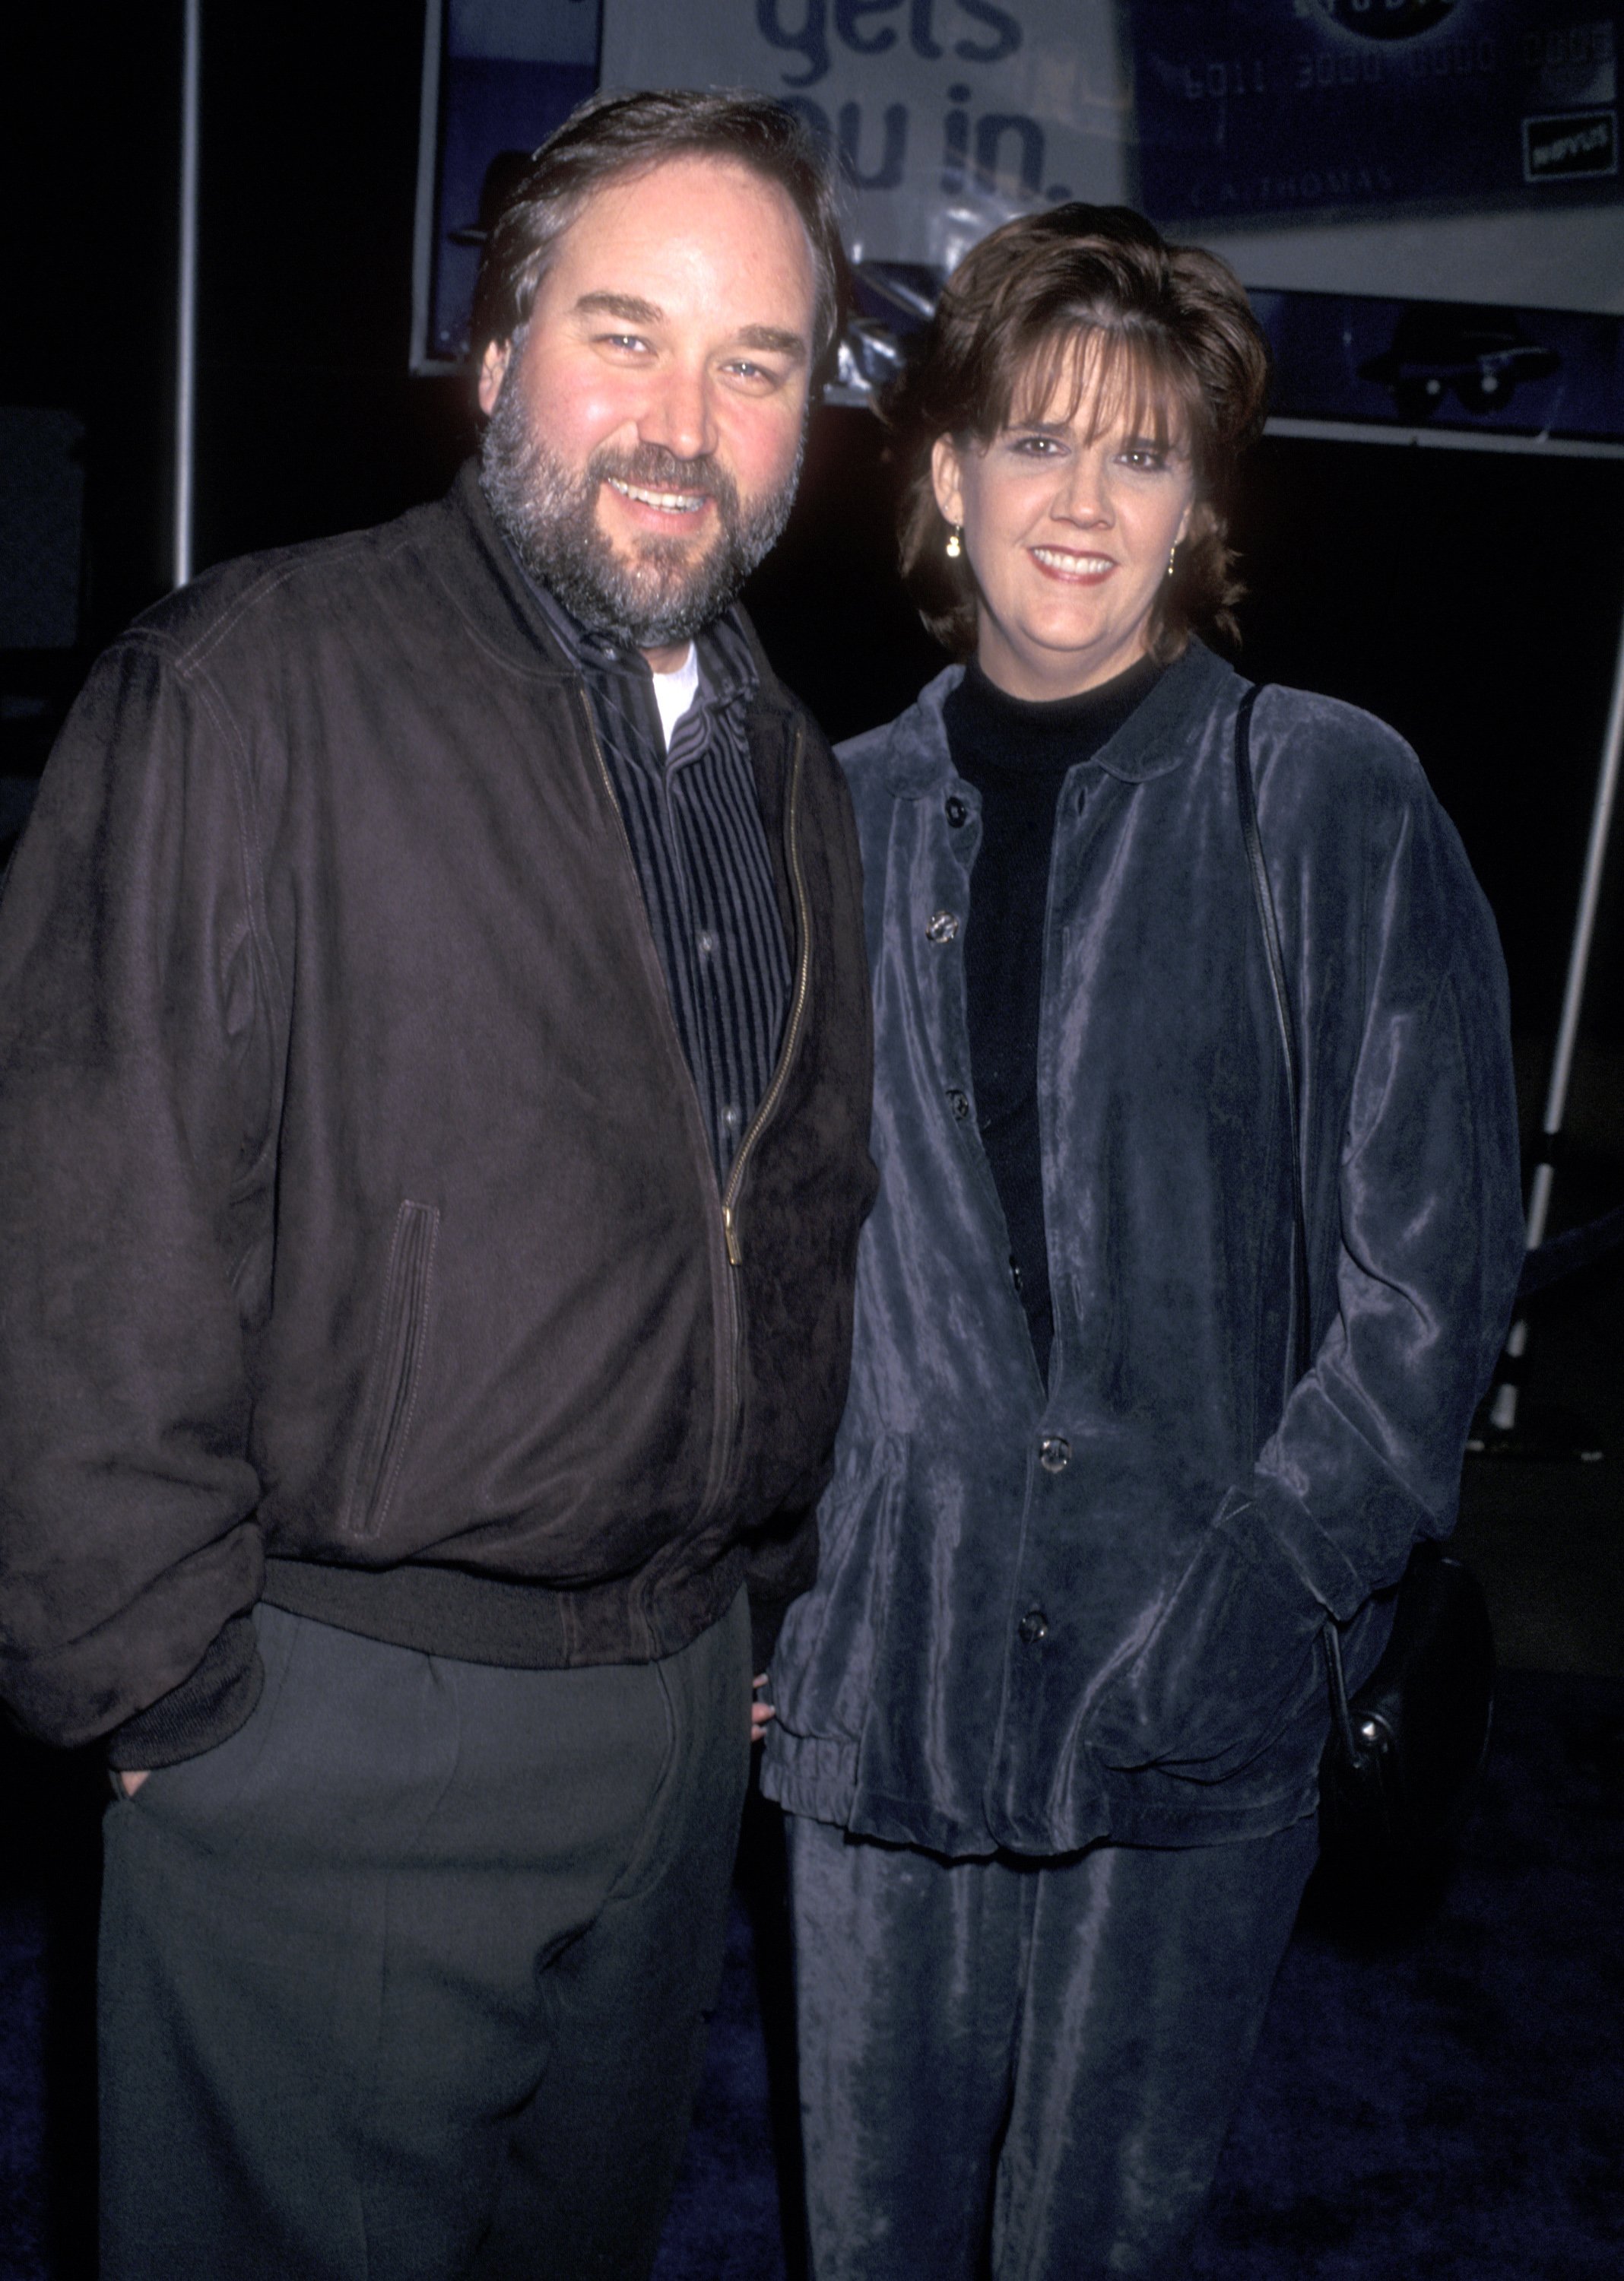  Richard Karn and wife Tudi Roche attend the 'Blues Brothers 2000' Universal City Premiere on January 31, 1998 at Universal Amphitheatre | Photo: Getty Images